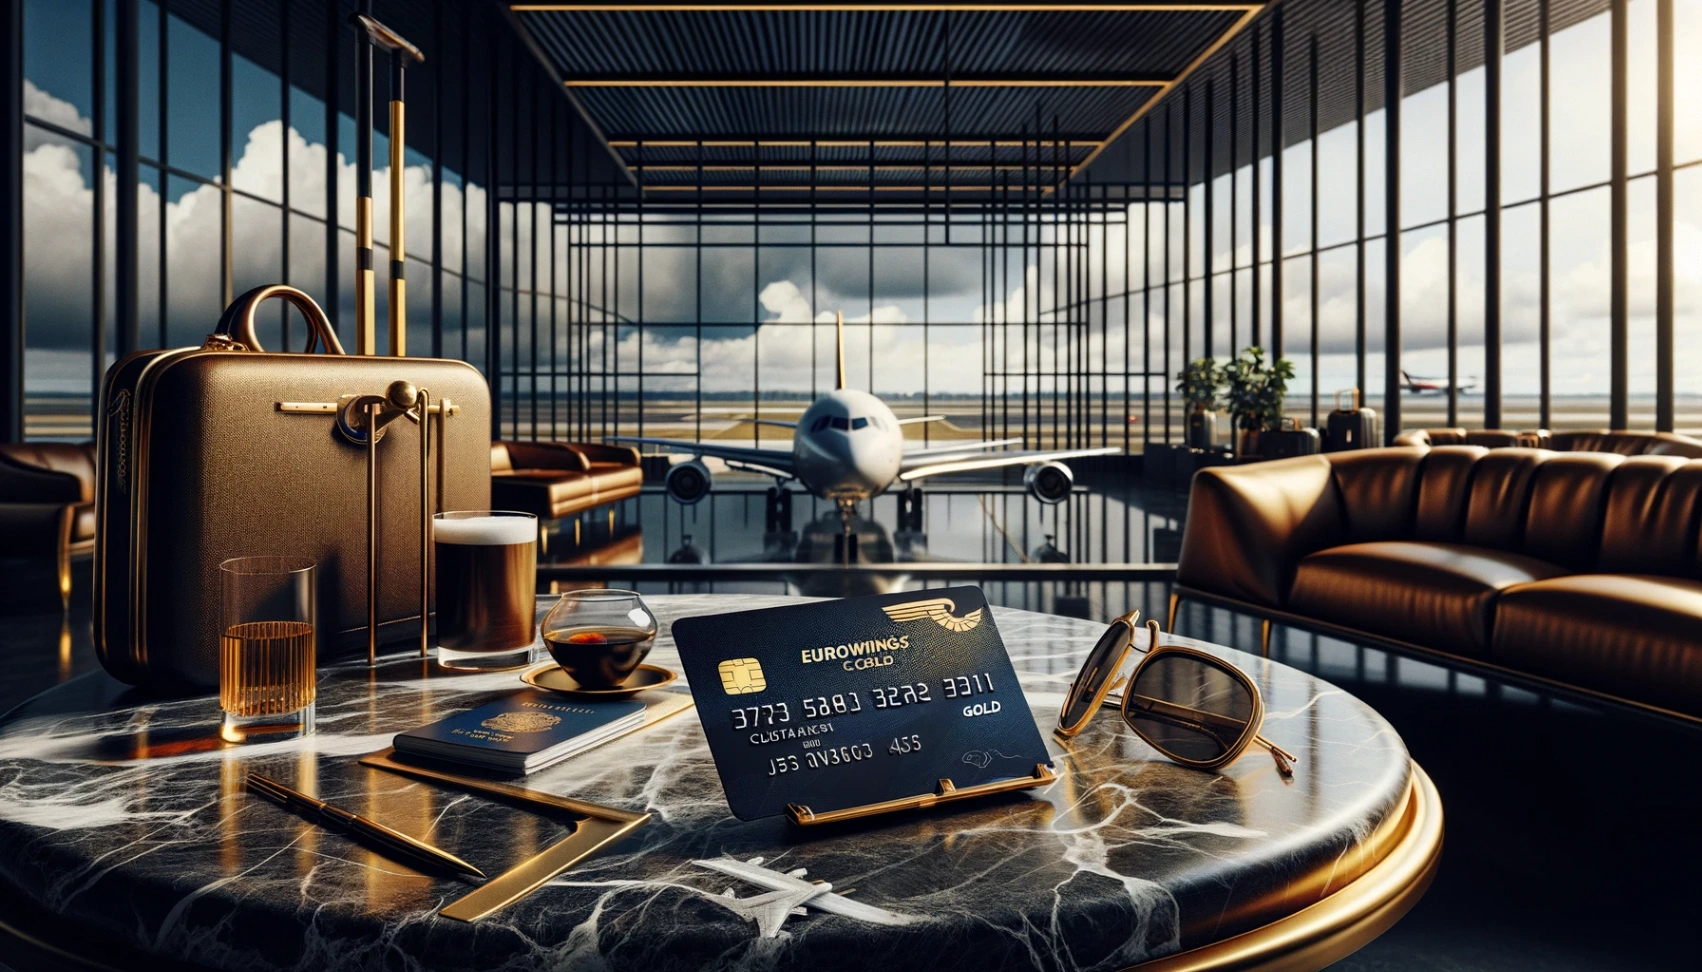 Eurowings Credit Card Gold: How to Apply Online